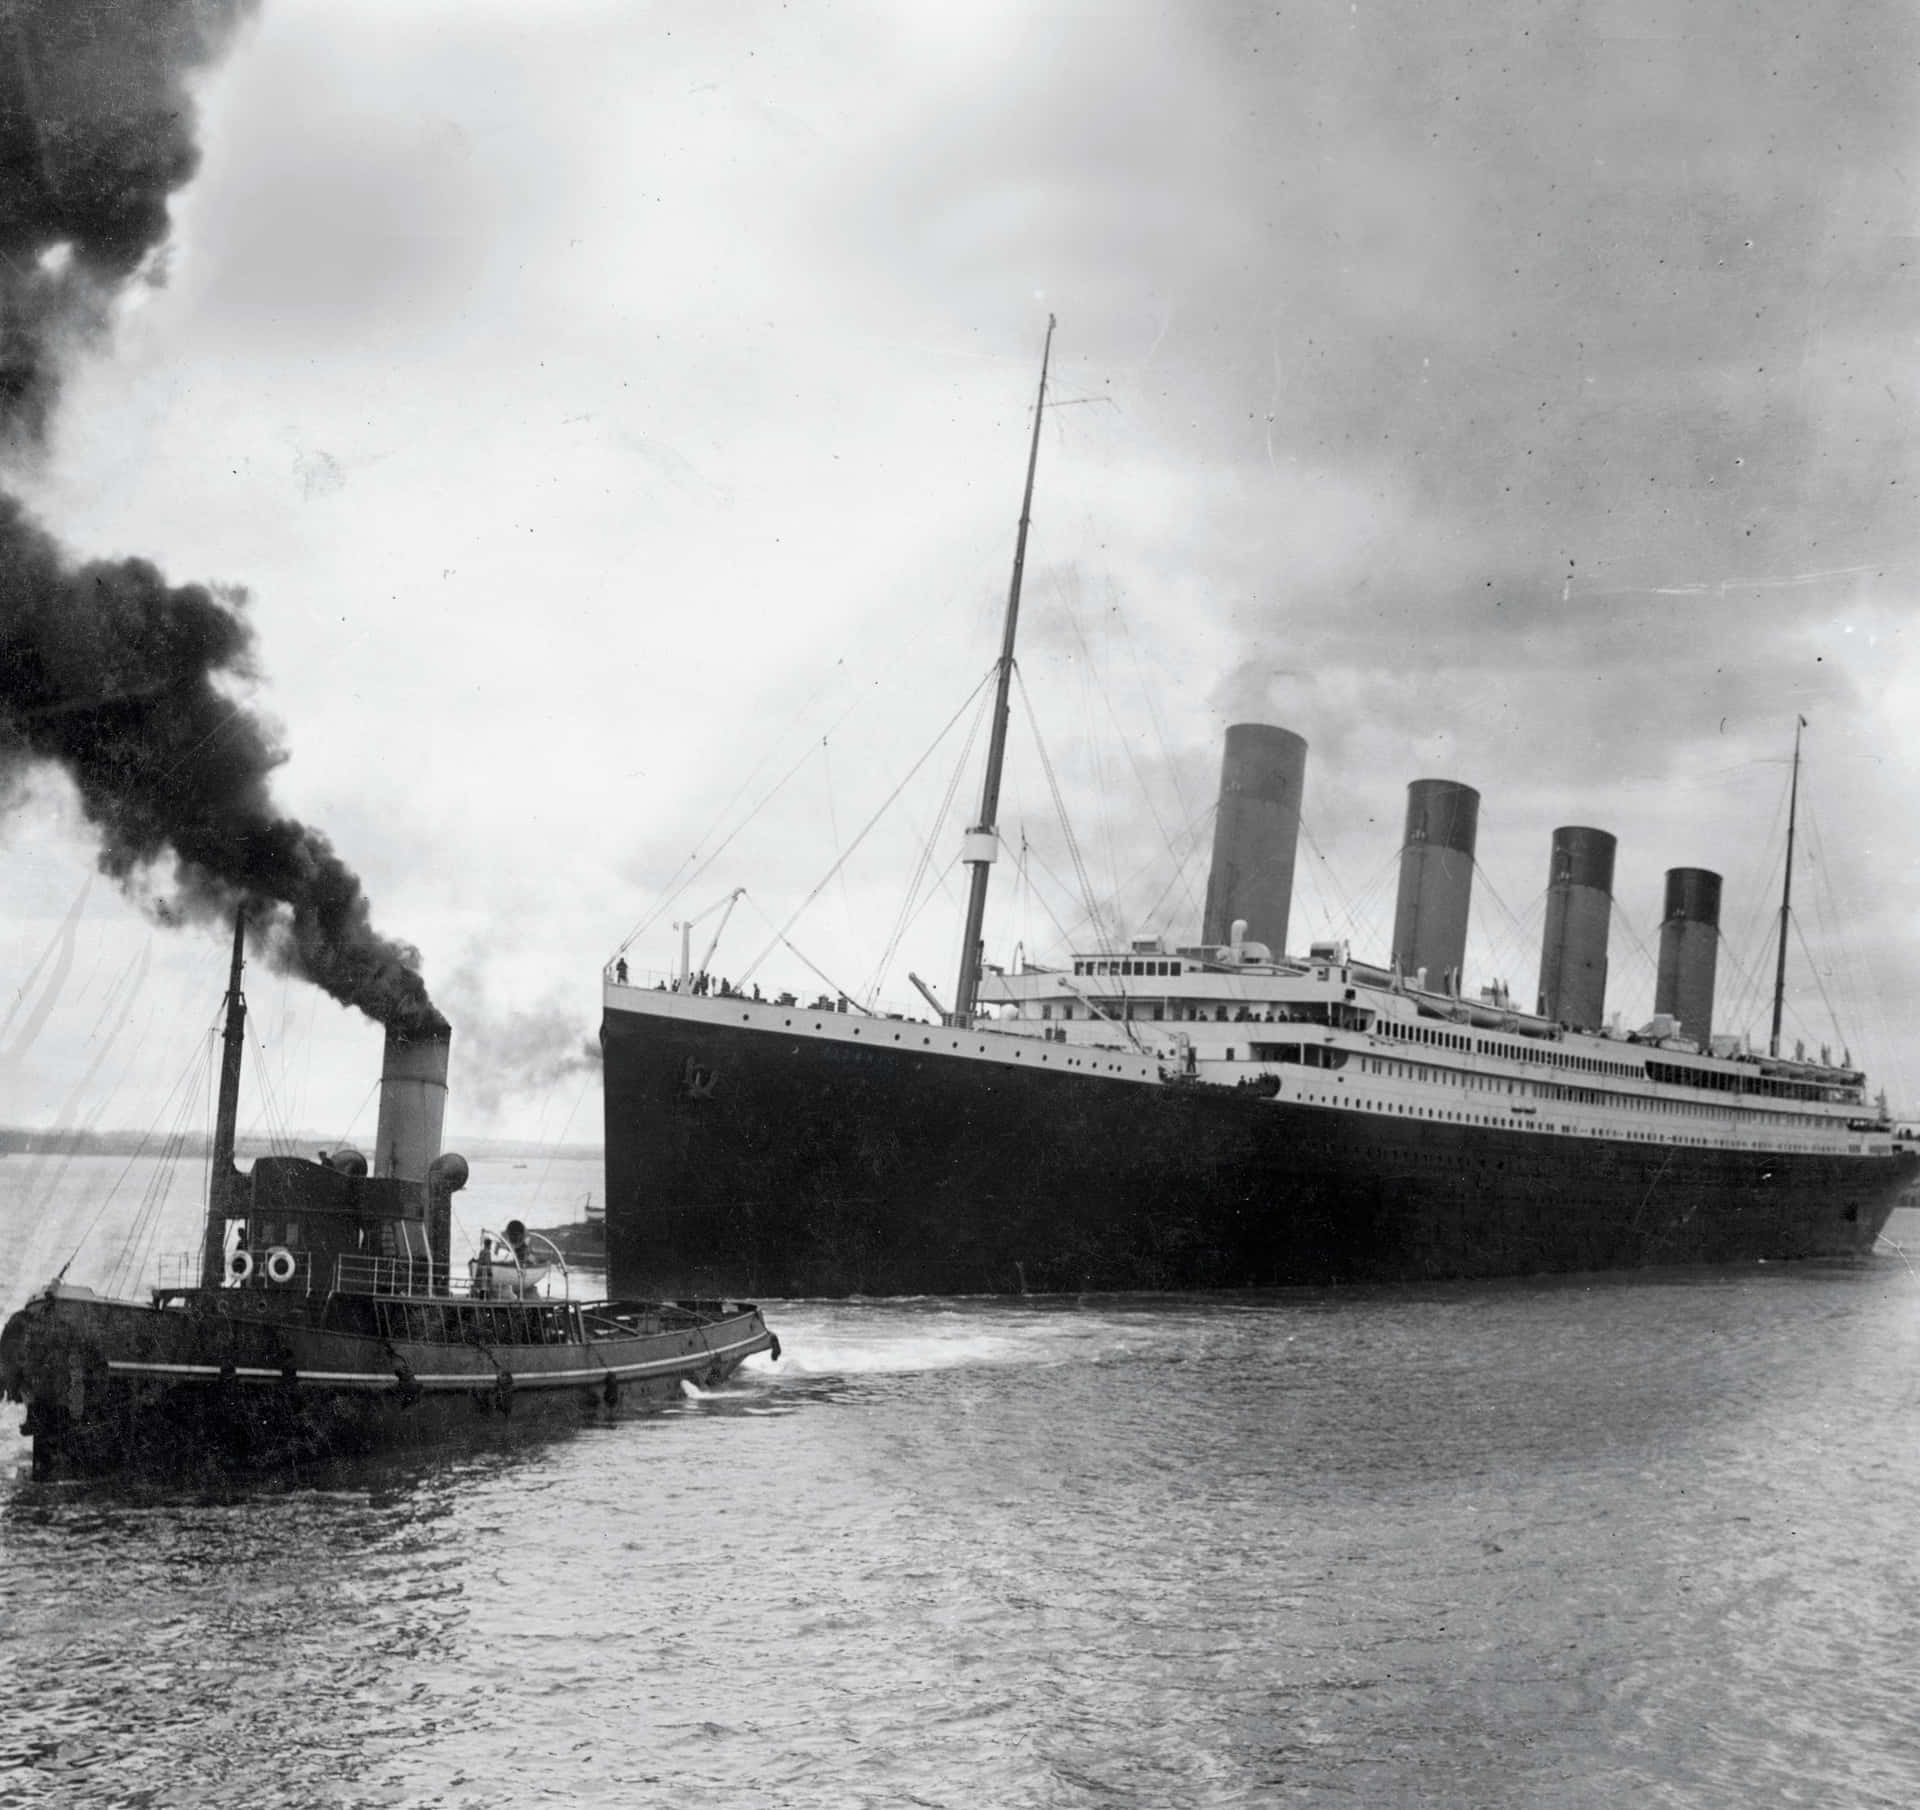 "The RMS Titanic Emerges from Foggy Waters"